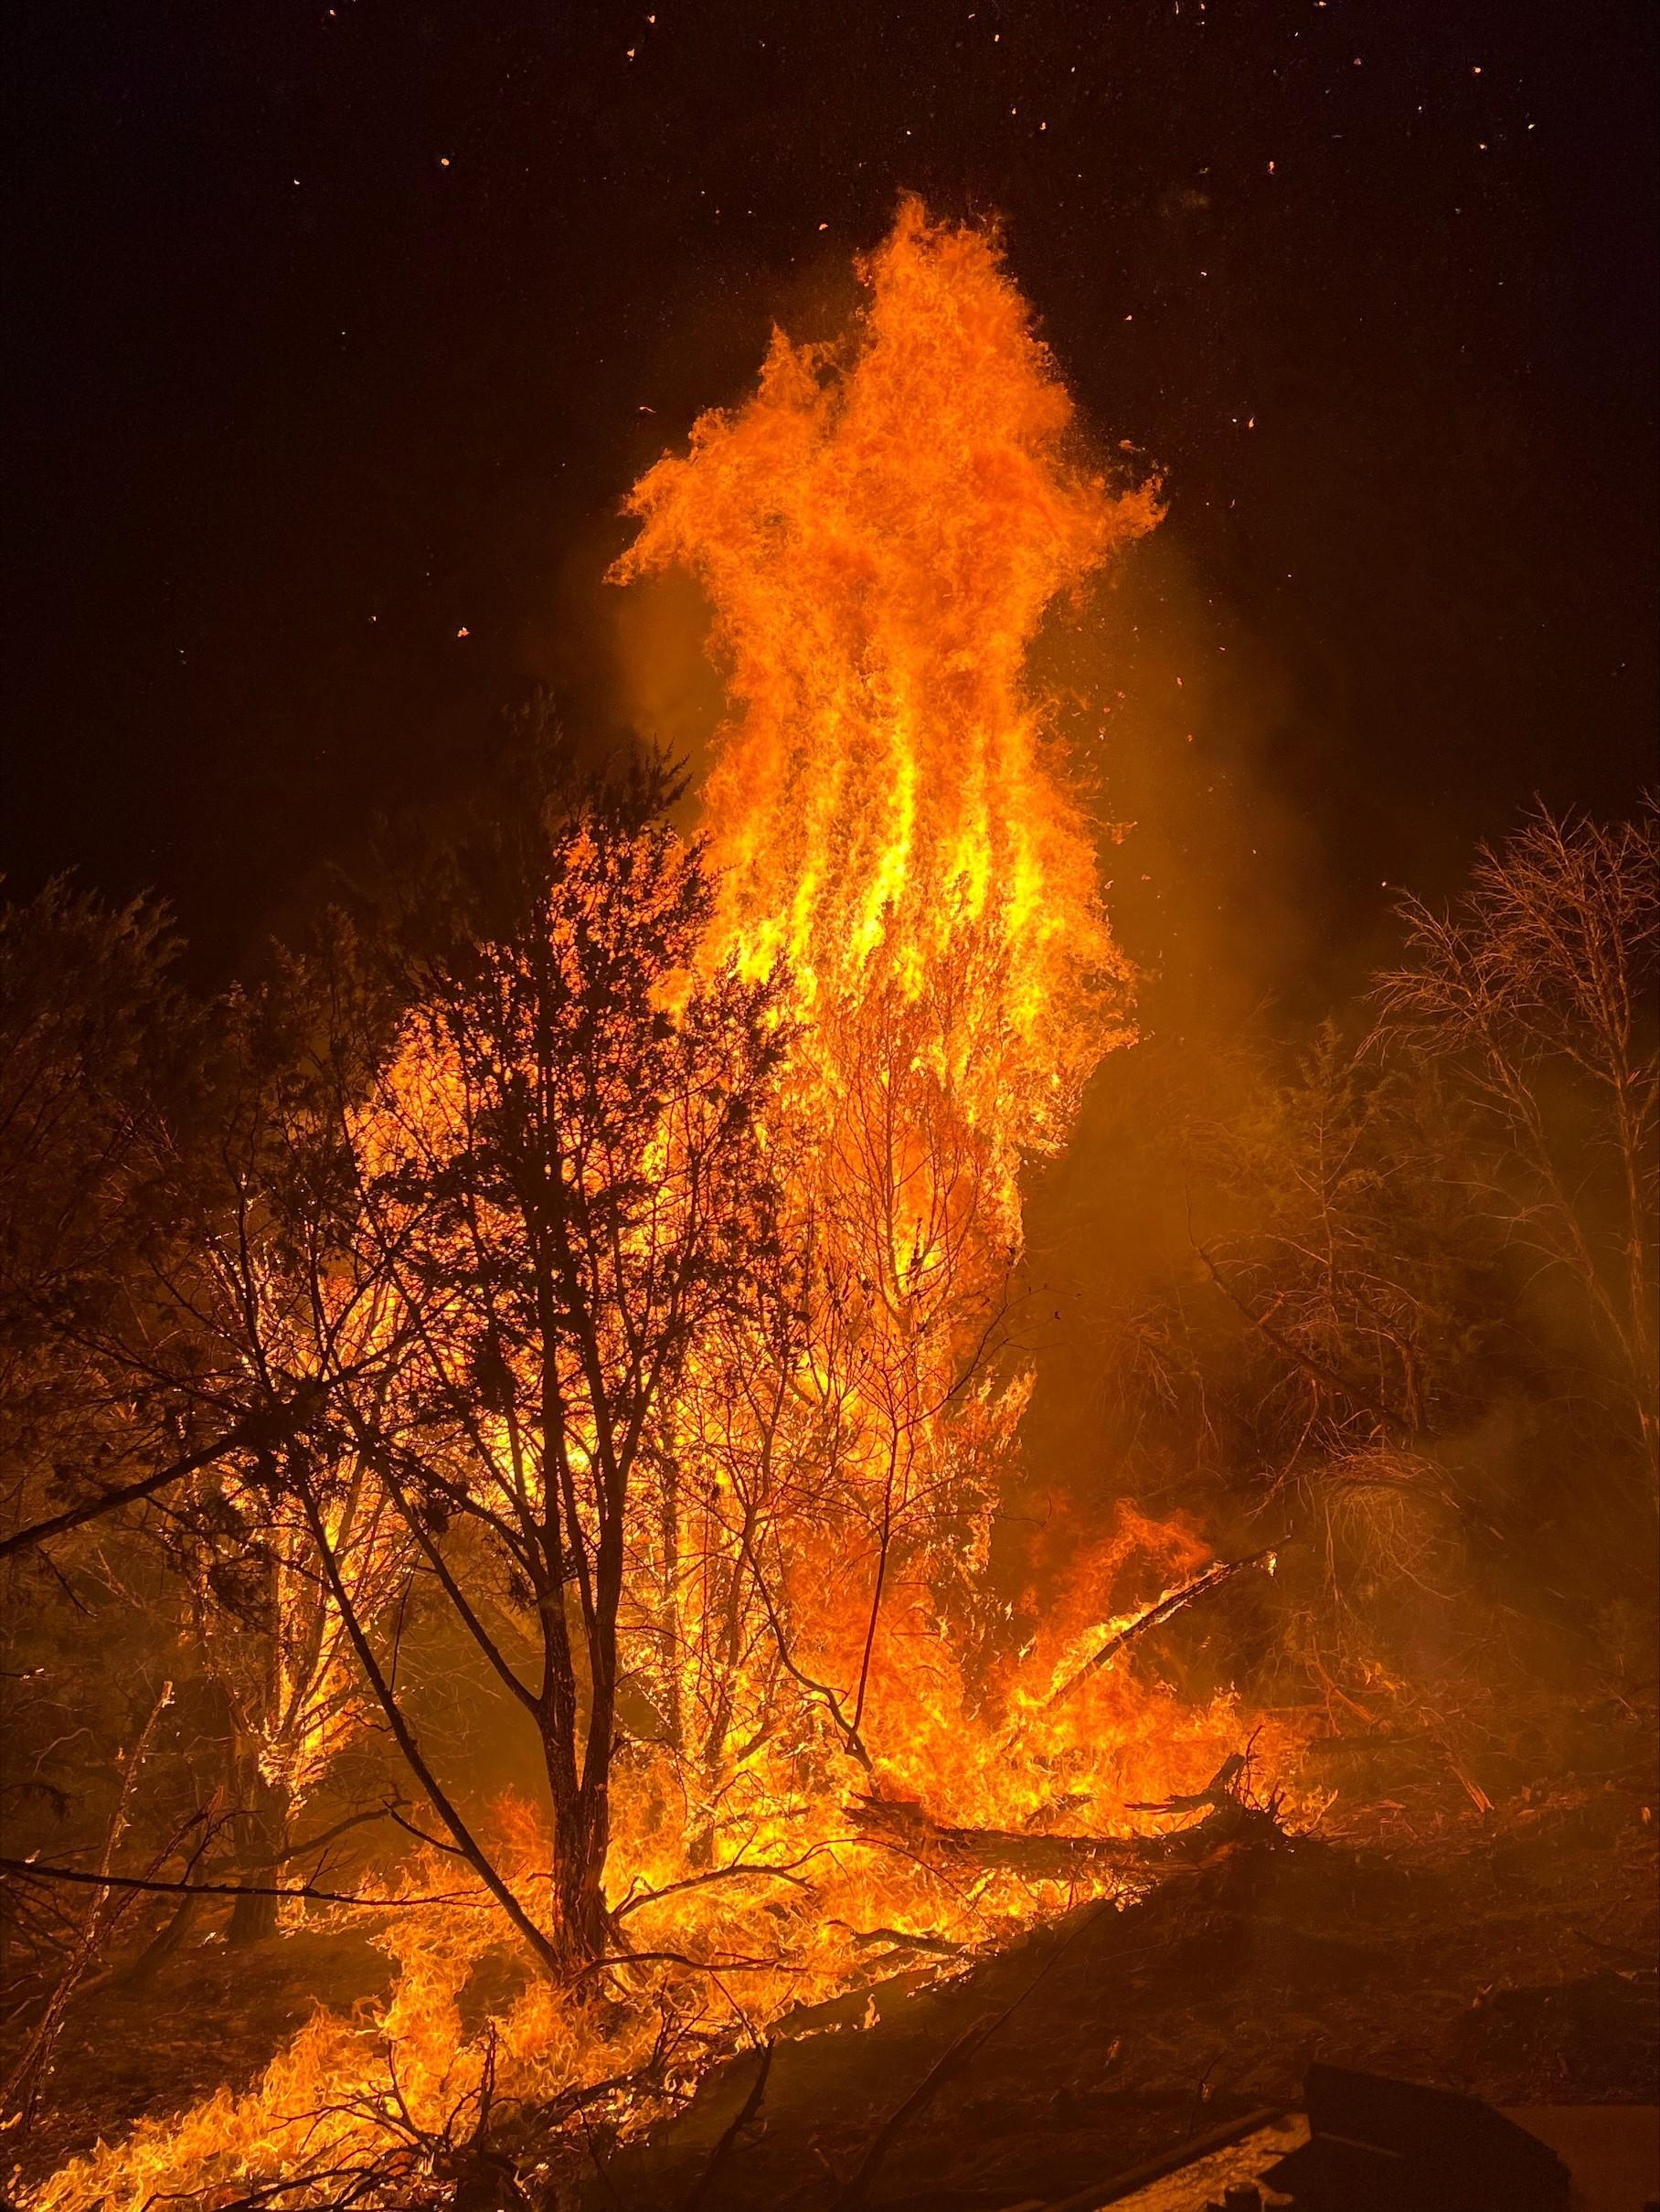 A group of junipers torching at night time shows bright orange and yellow flames with small ember wash coming off of the brush as it is fully consumed by the flames.